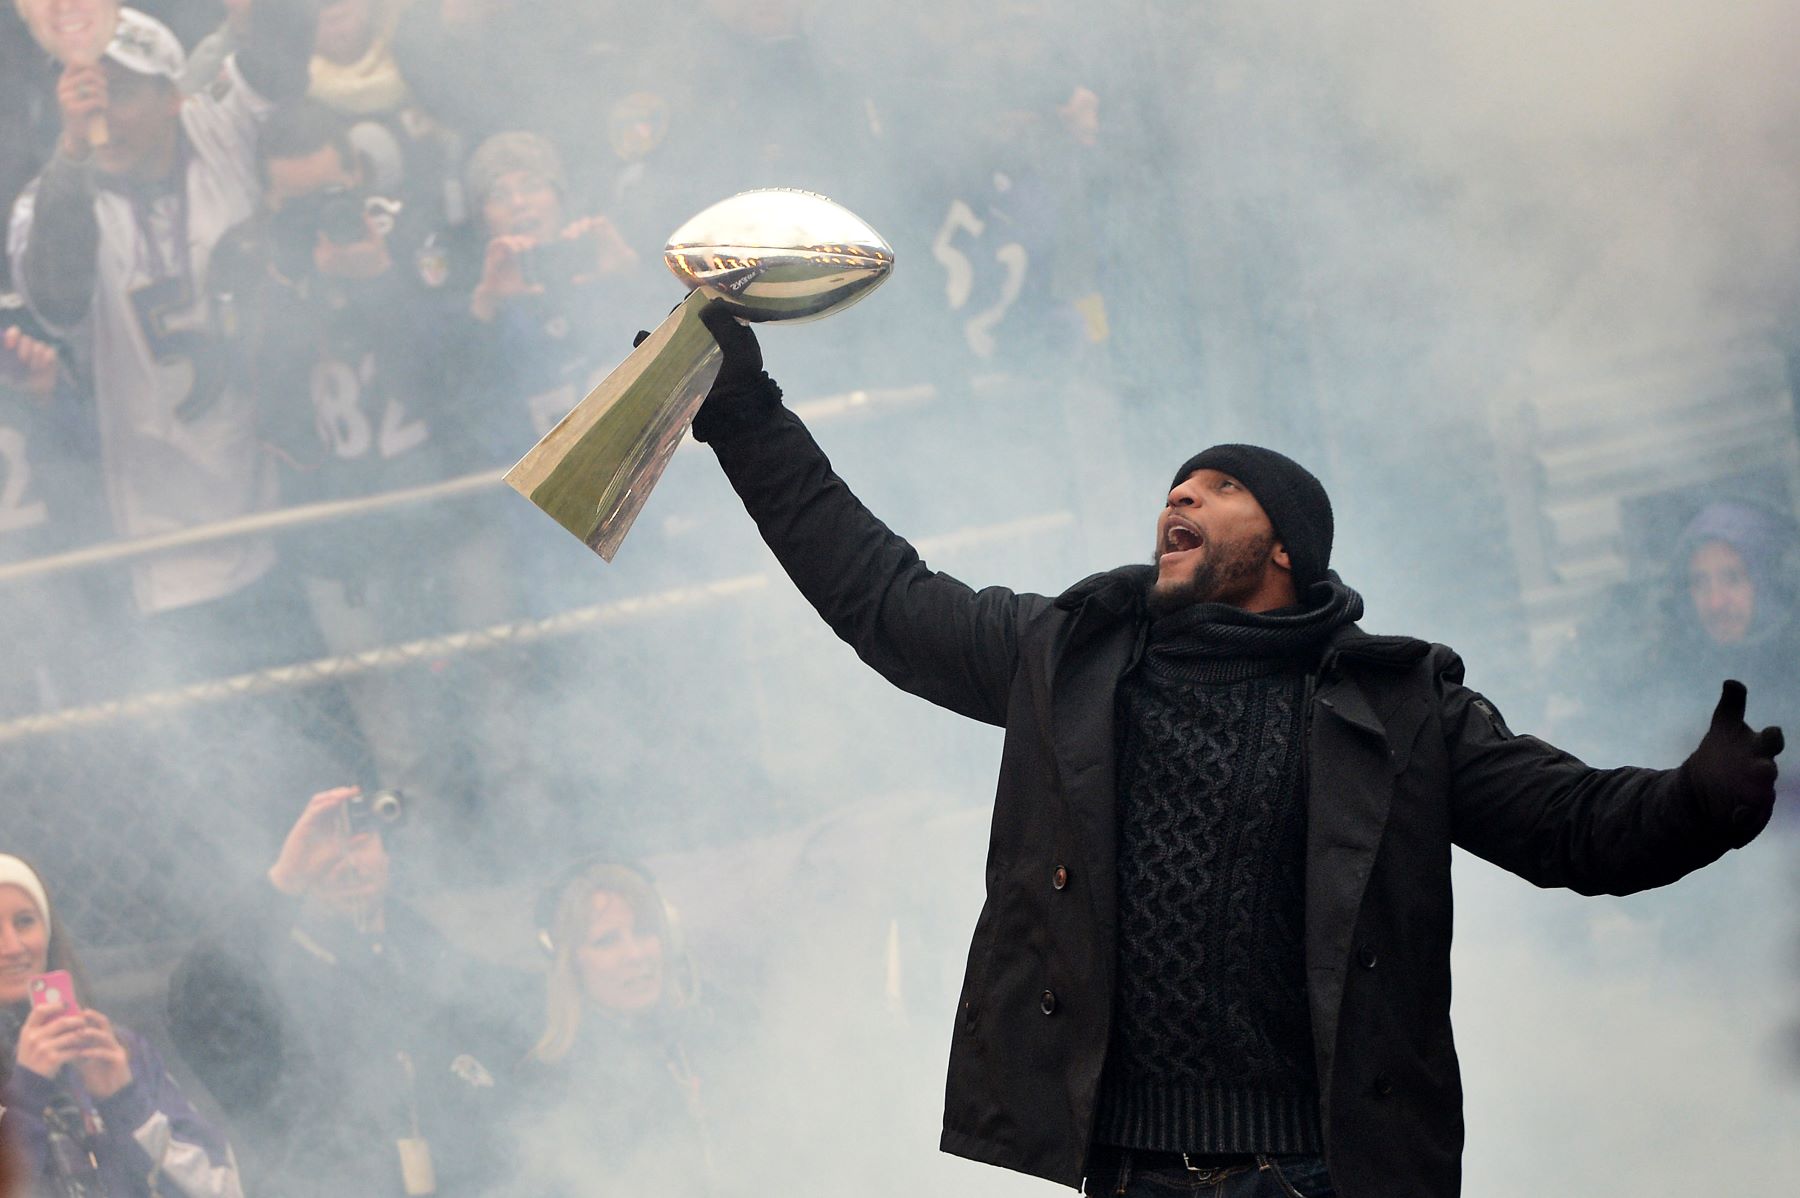 Baltimore Ravens linebacker #52 Ray Lewis holding the Vince Lombardi Trophy after winning Super Bowl XLVII